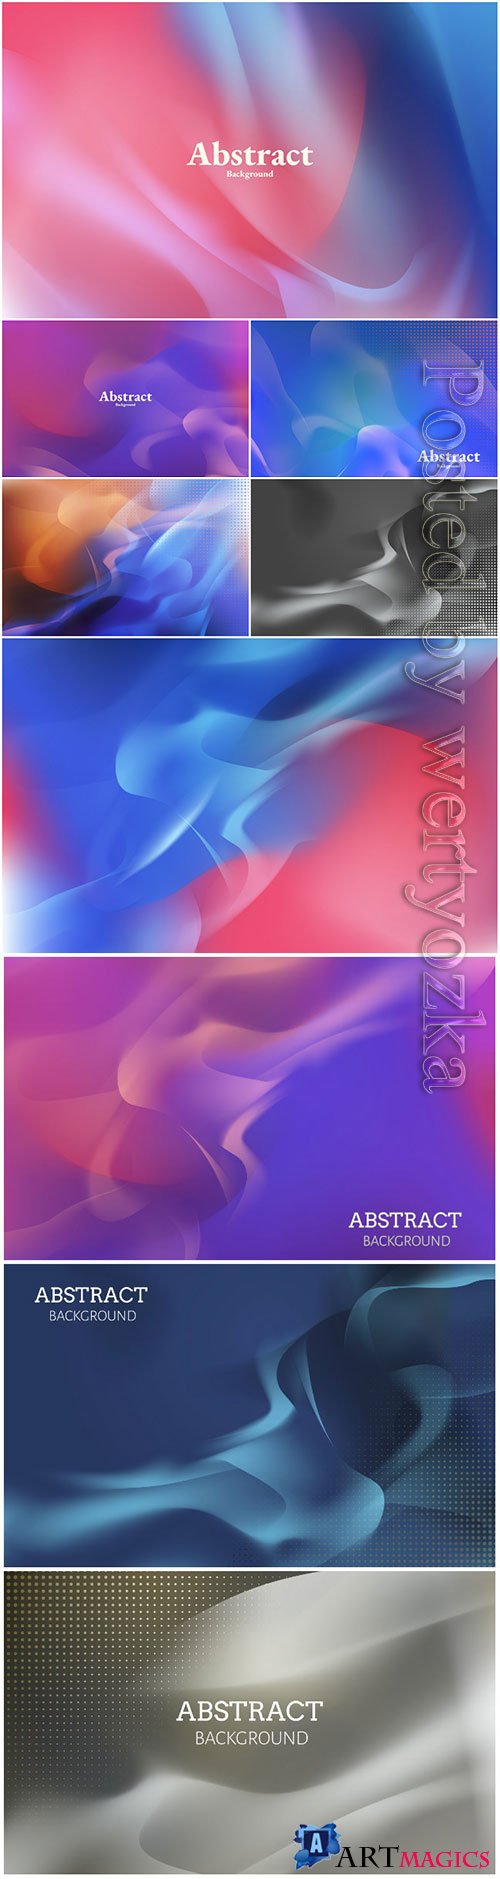 Abstract wavy vector background